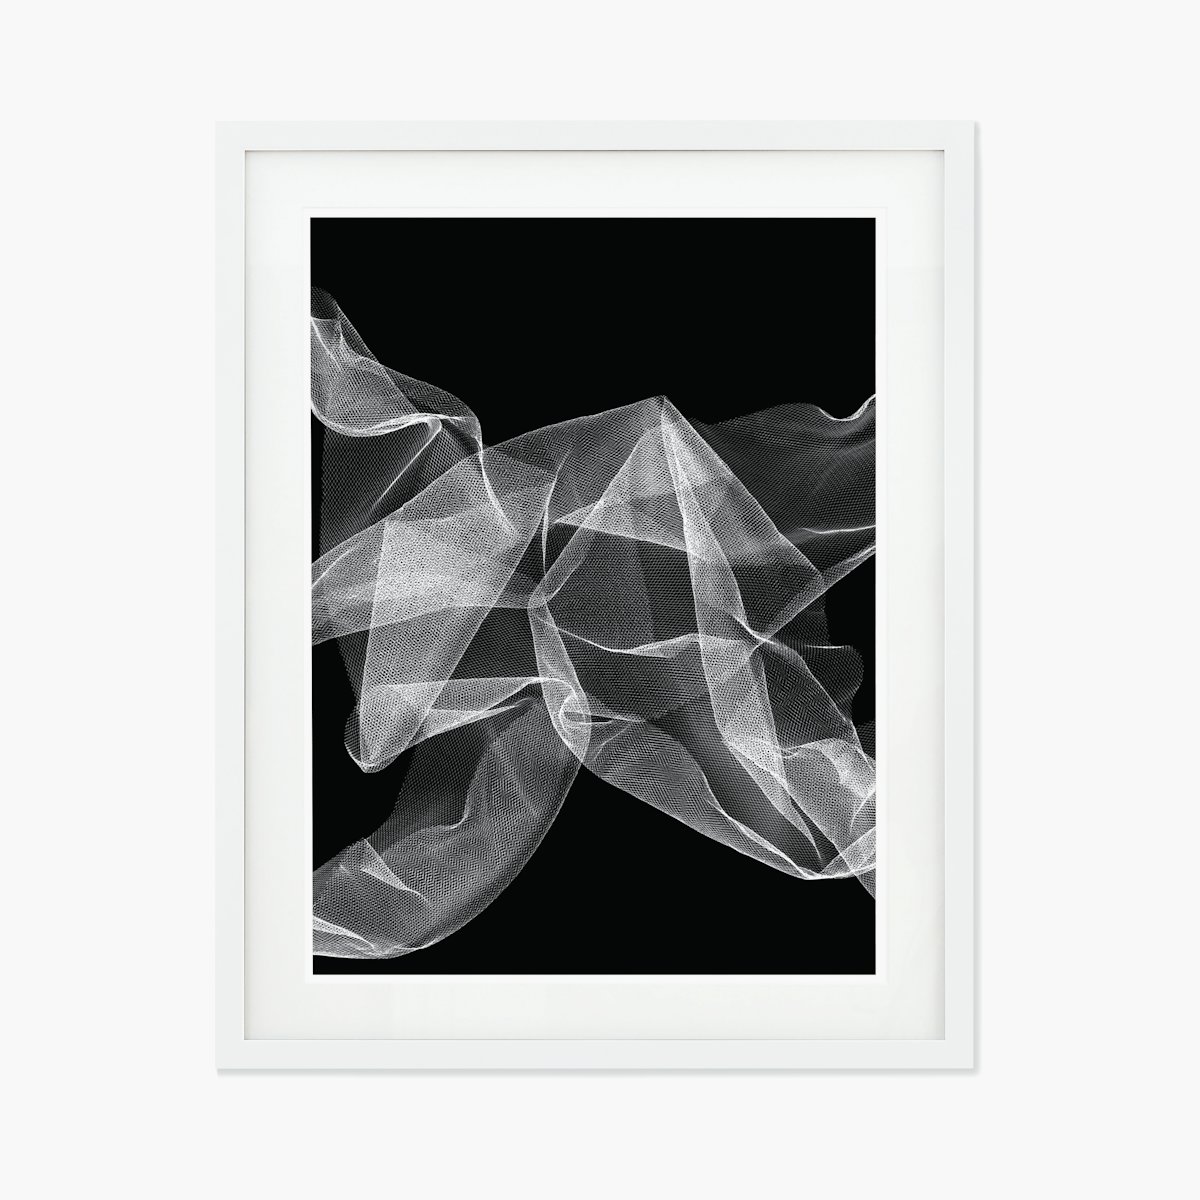 “Illusion” by Permanent Press Editions, Edition 2